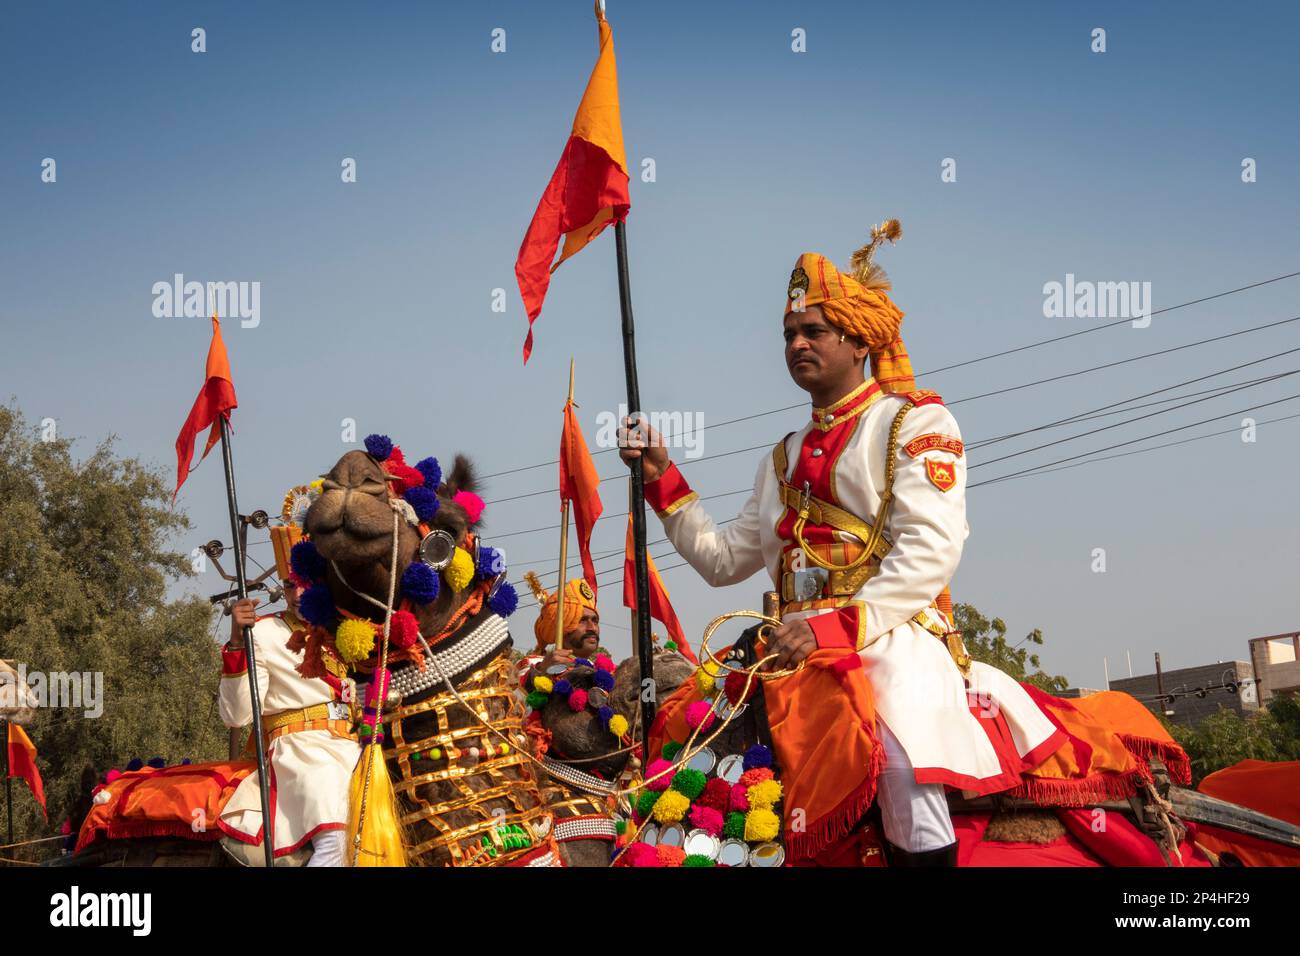 India, Rajasthan, Bikaner, Camel Festival Parade, camel-mounted Border Security Force soldiers in dress uniform Stock Photo